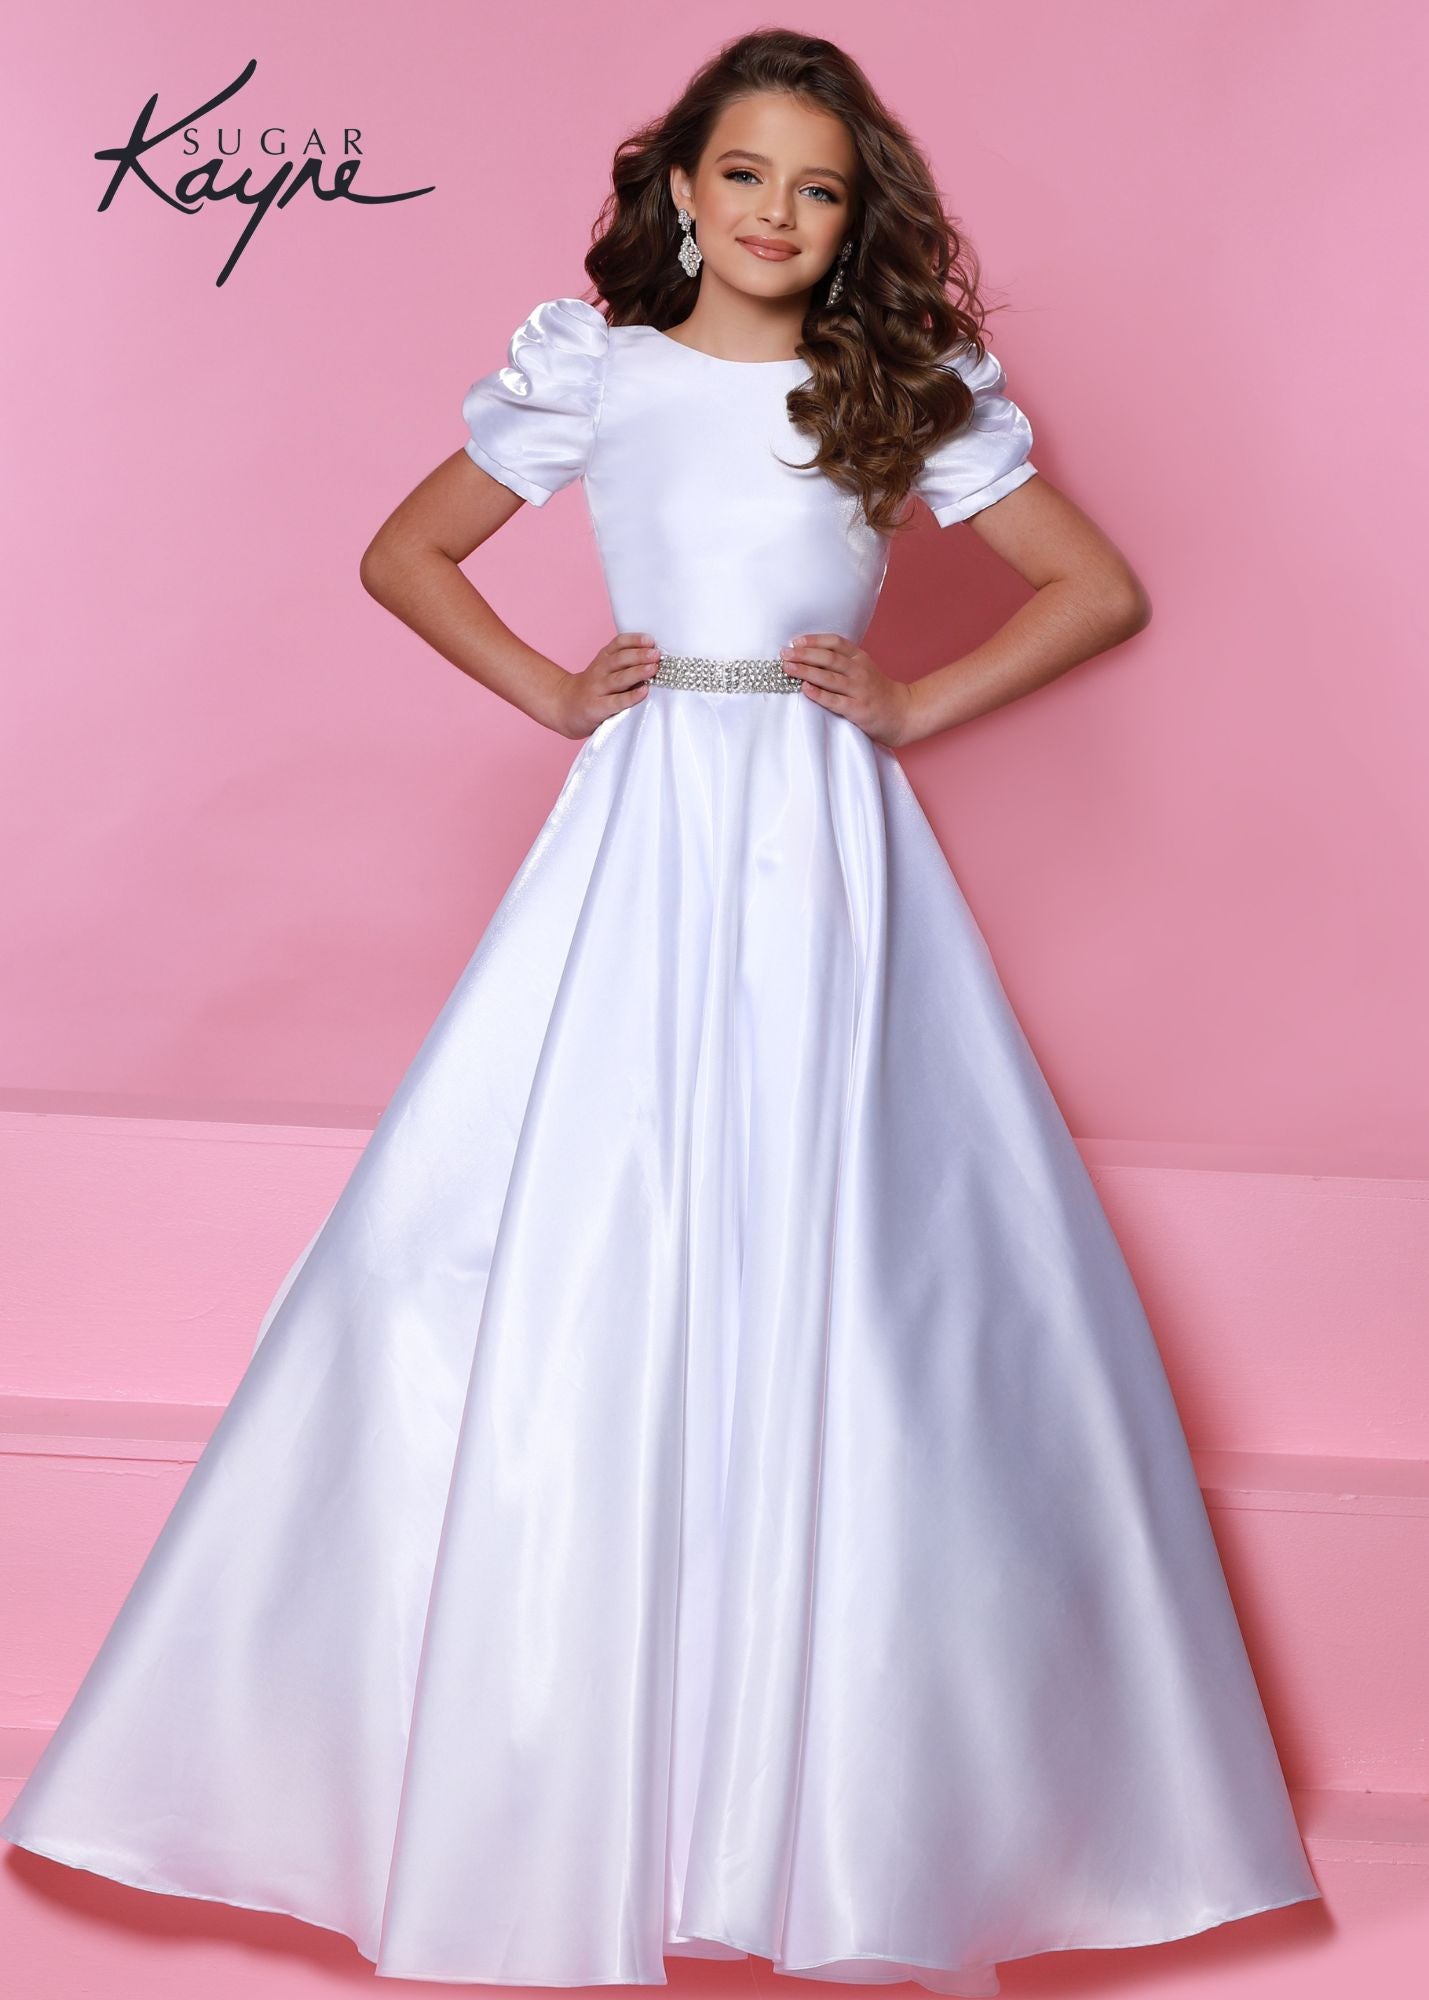 Sugar Kayne C325 short cocktail dress long satin cap sleeve overskirt Pageant Gown Girls Endless possibilities with this shimmer satin dress- make your fit short or long with the detachable beaded belt overskirt!  Colors: Aqua, Cherry, Black, White  Sizes: 2, 4, 6, 8, 10, 12, 14, 16  Fabric Shimmer Satin, Satin Lining